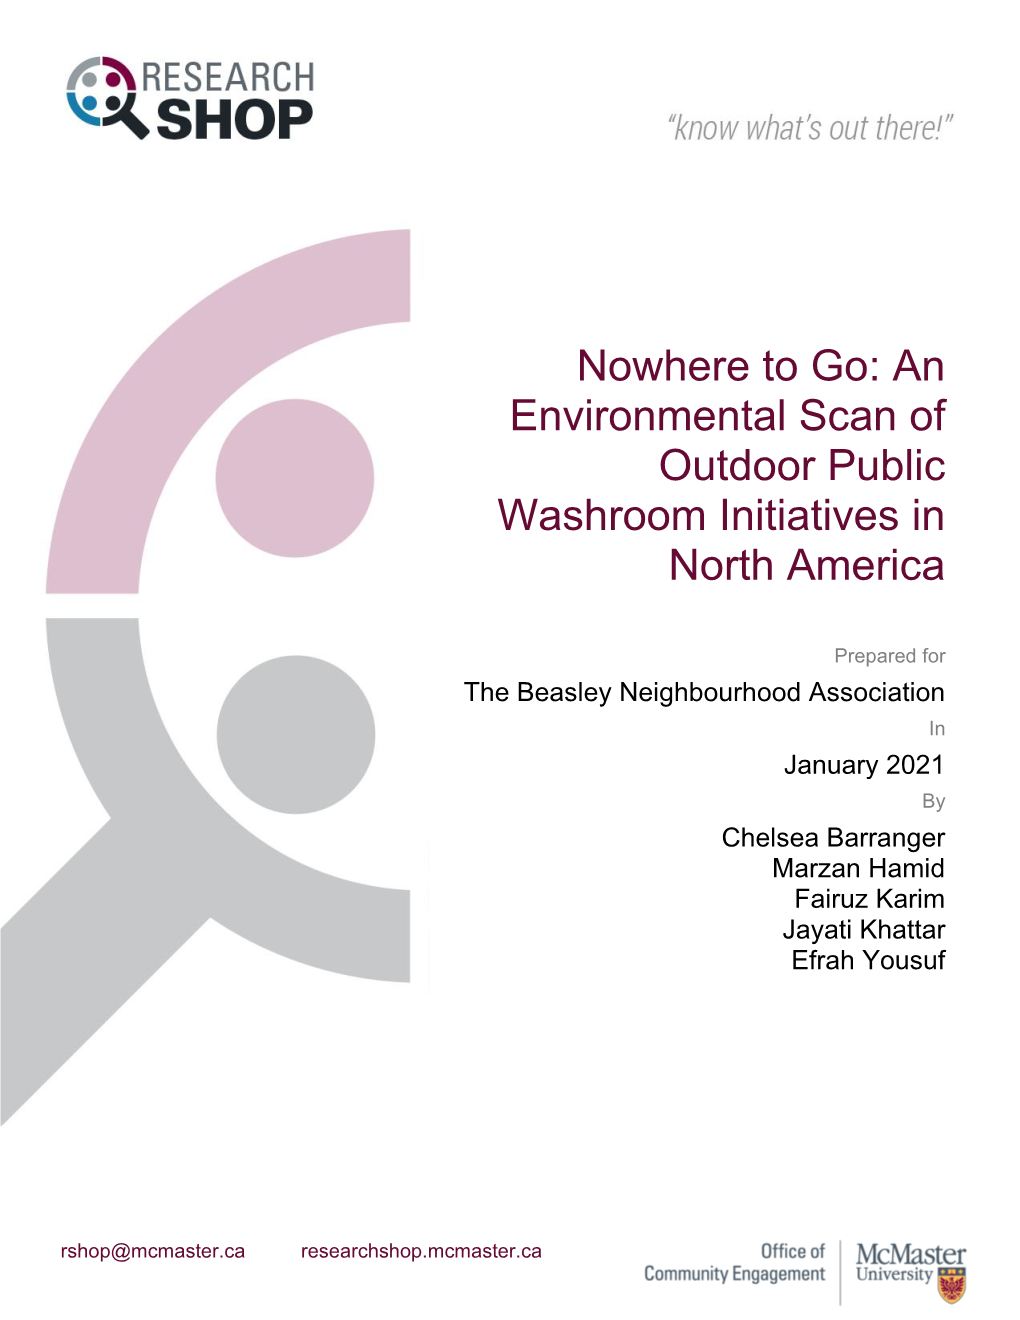 An Environmental Scan of Outdoor Public Washroom Initiatives in North America